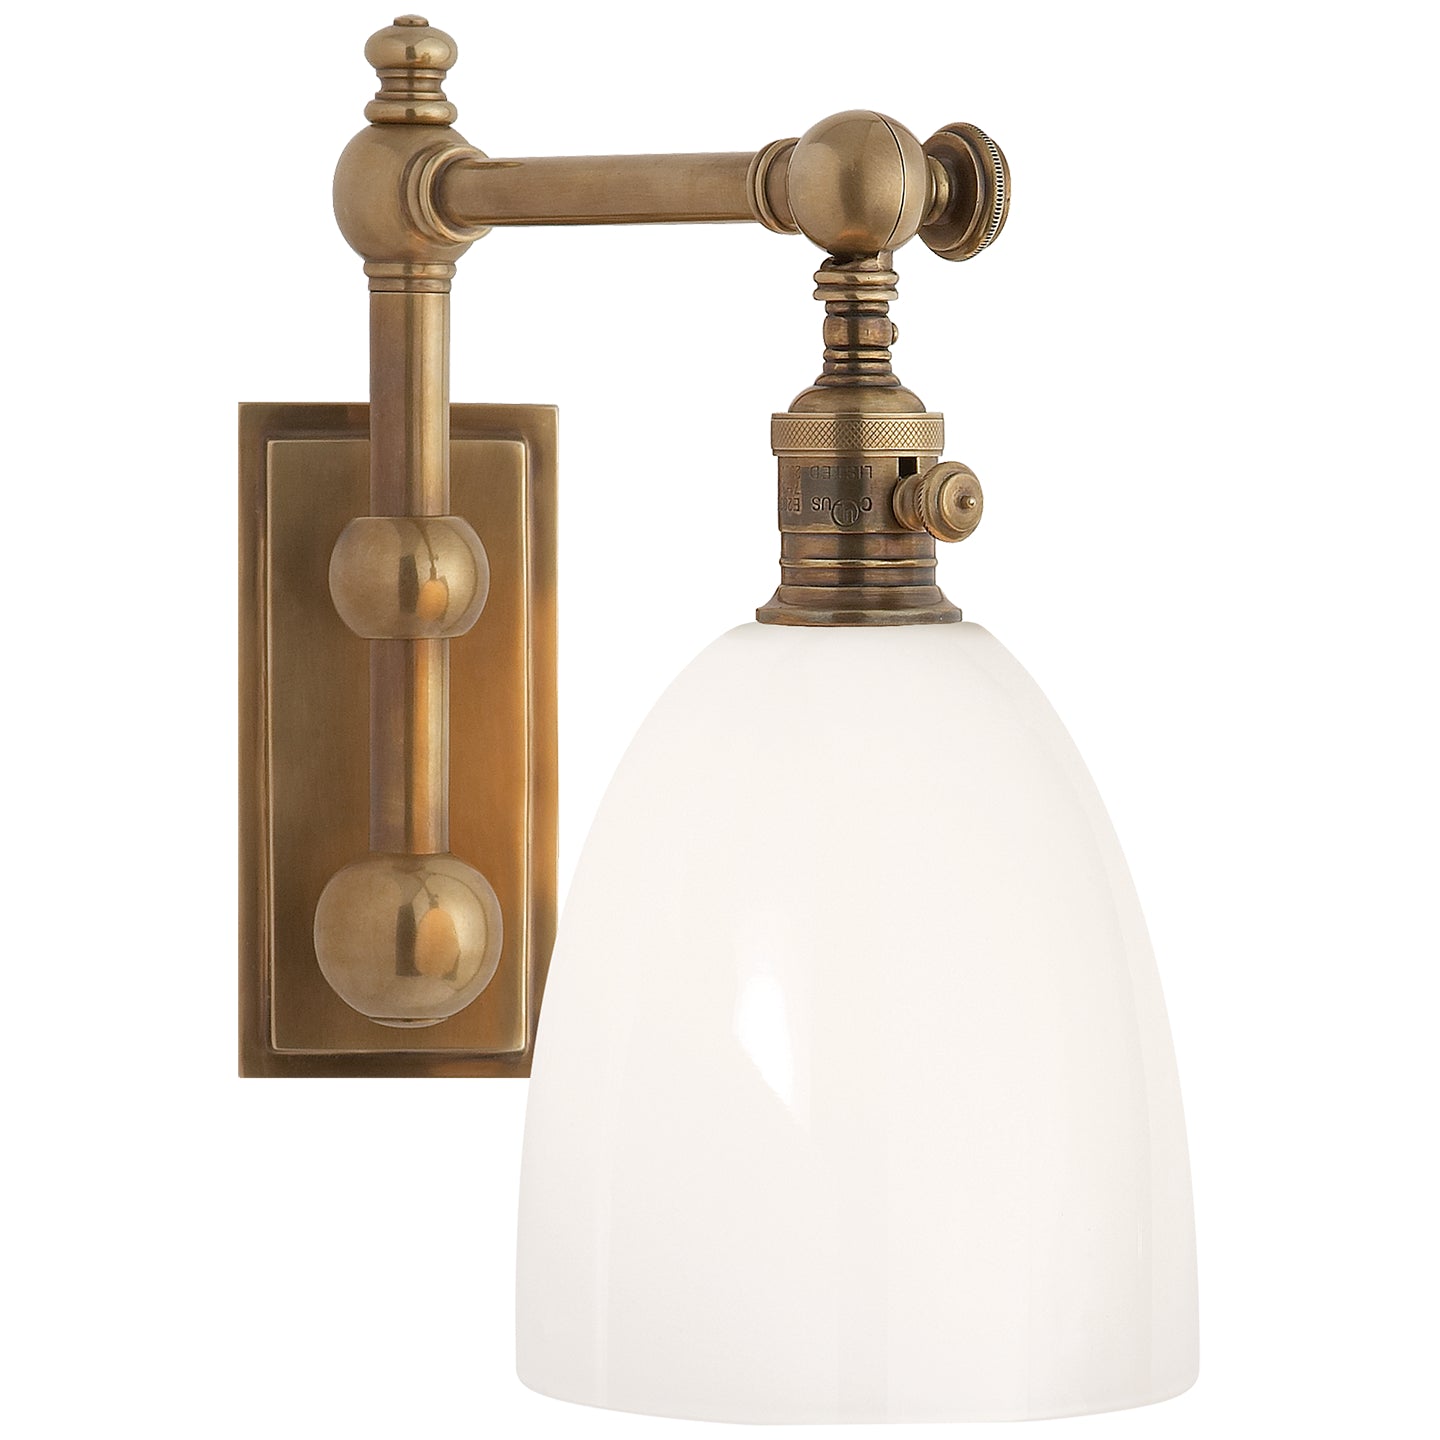 Visual Comfort Signature - CHD 2153AB-WG - One Light Wall Sconce - Pimlico - Antique-Burnished Brass